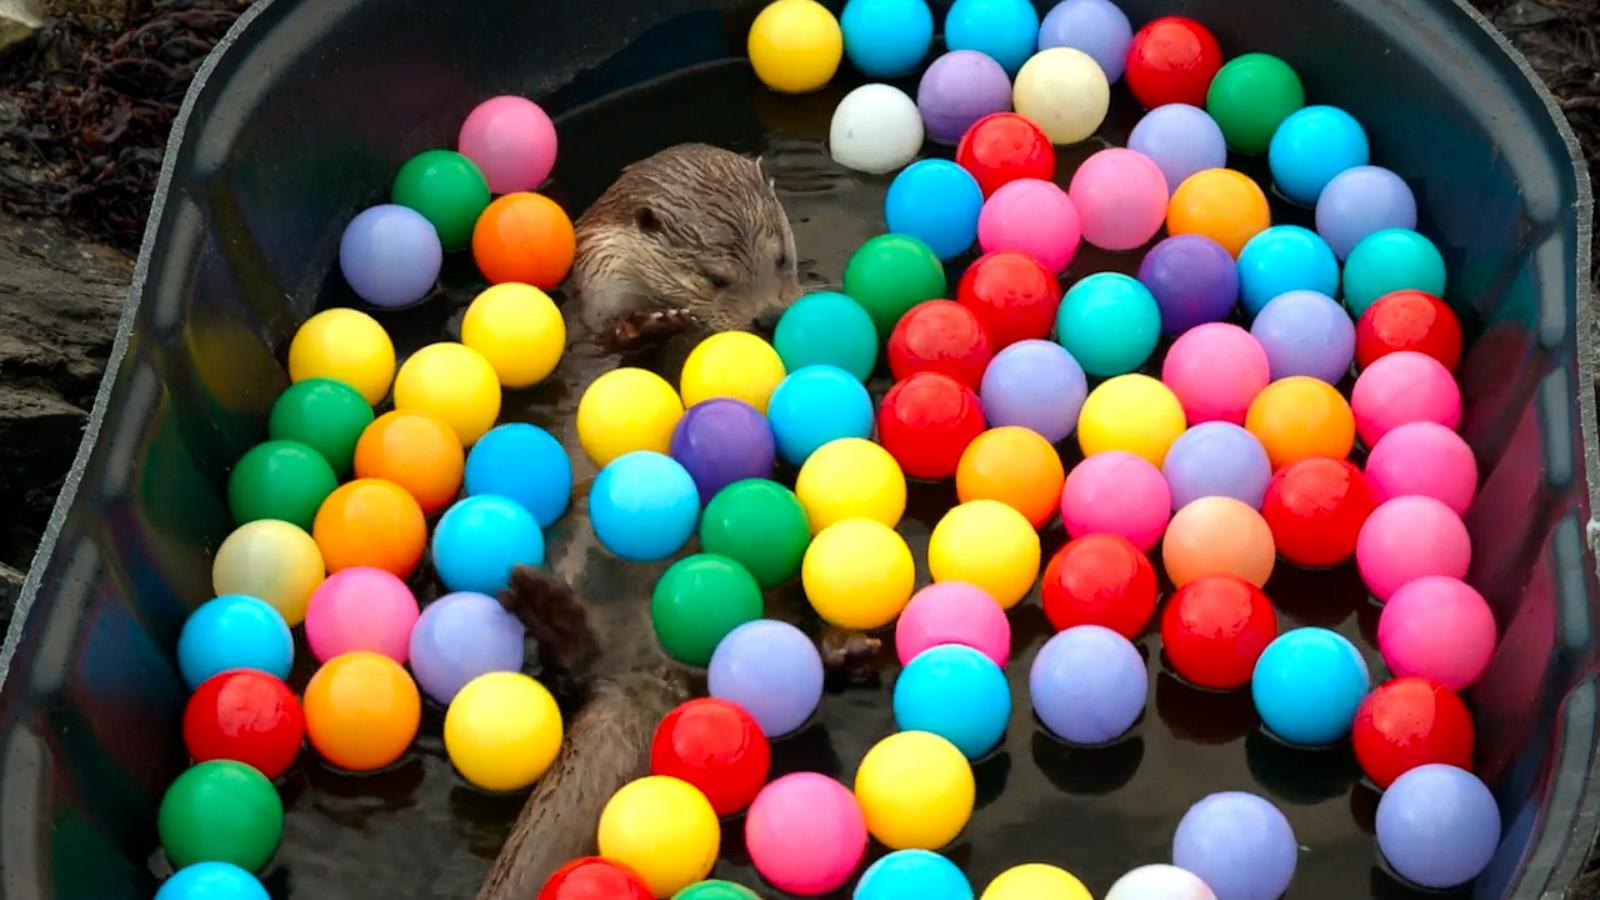 VIDEO: Meet Molly, a wild otter that splashes into fun in National Geographic’s new special